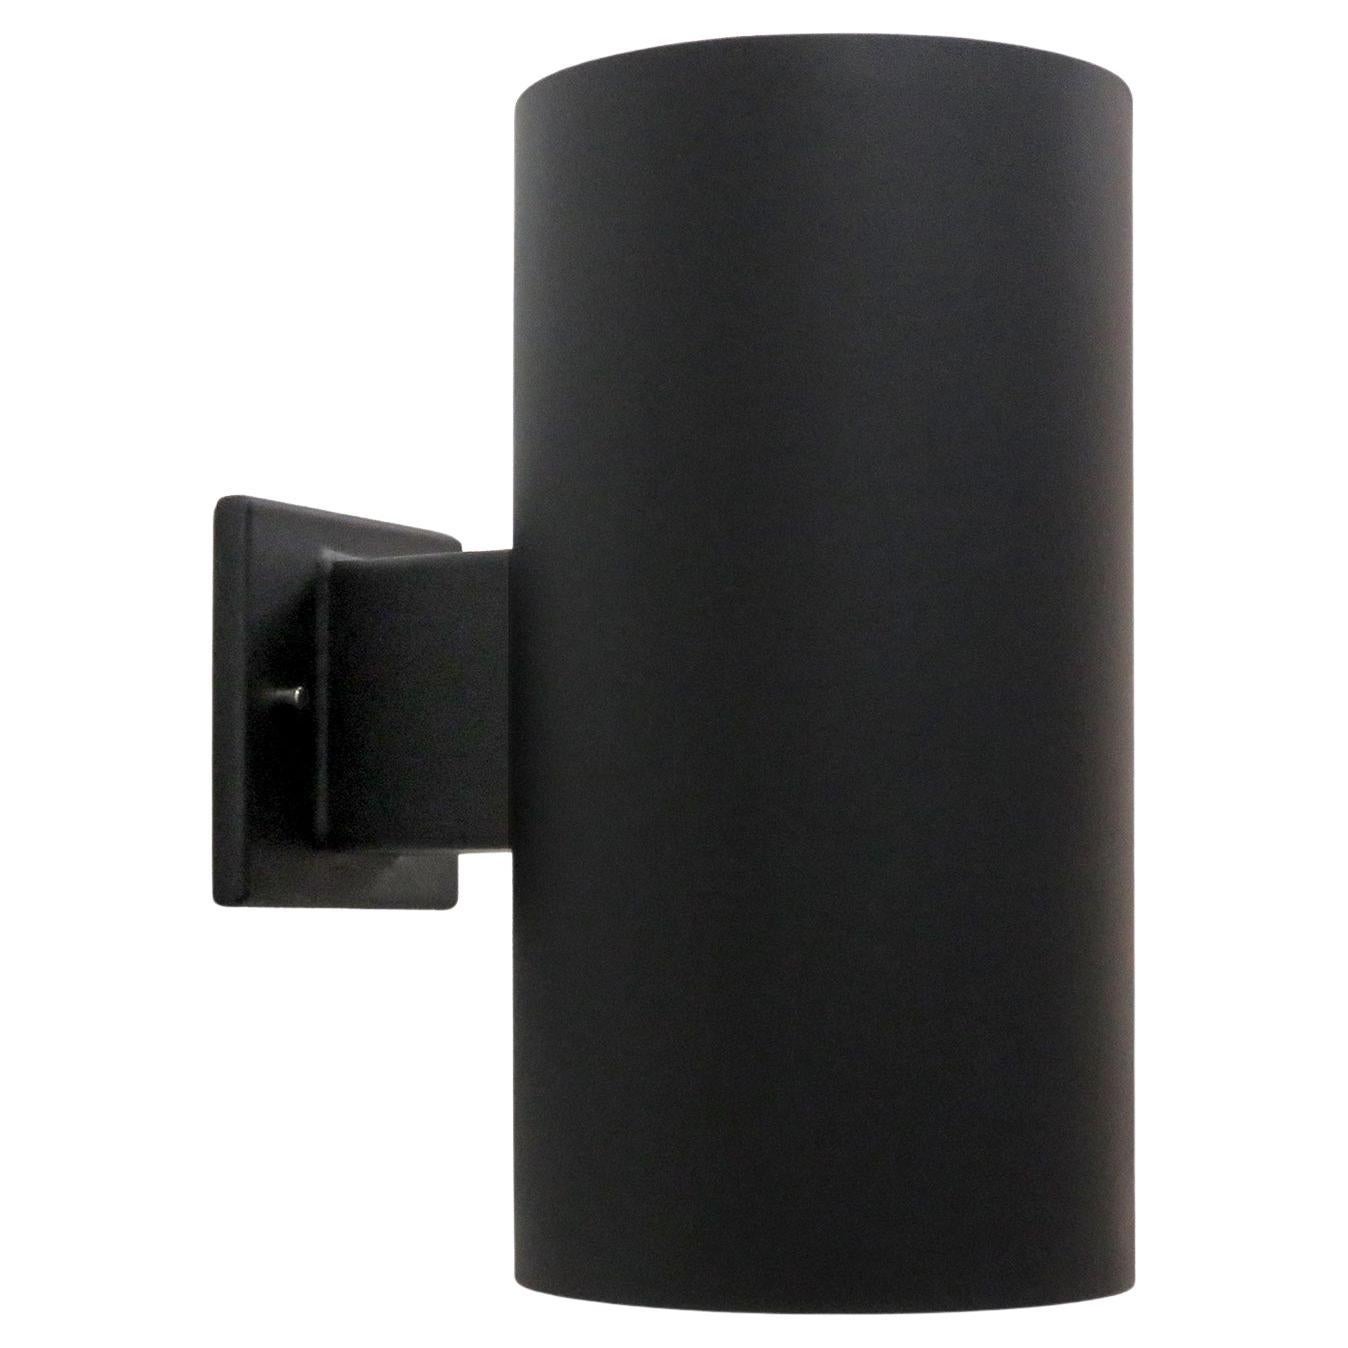 Cylinder Wall Light by Ella & John Meiling for Louis Poulsen, 1970 For Sale